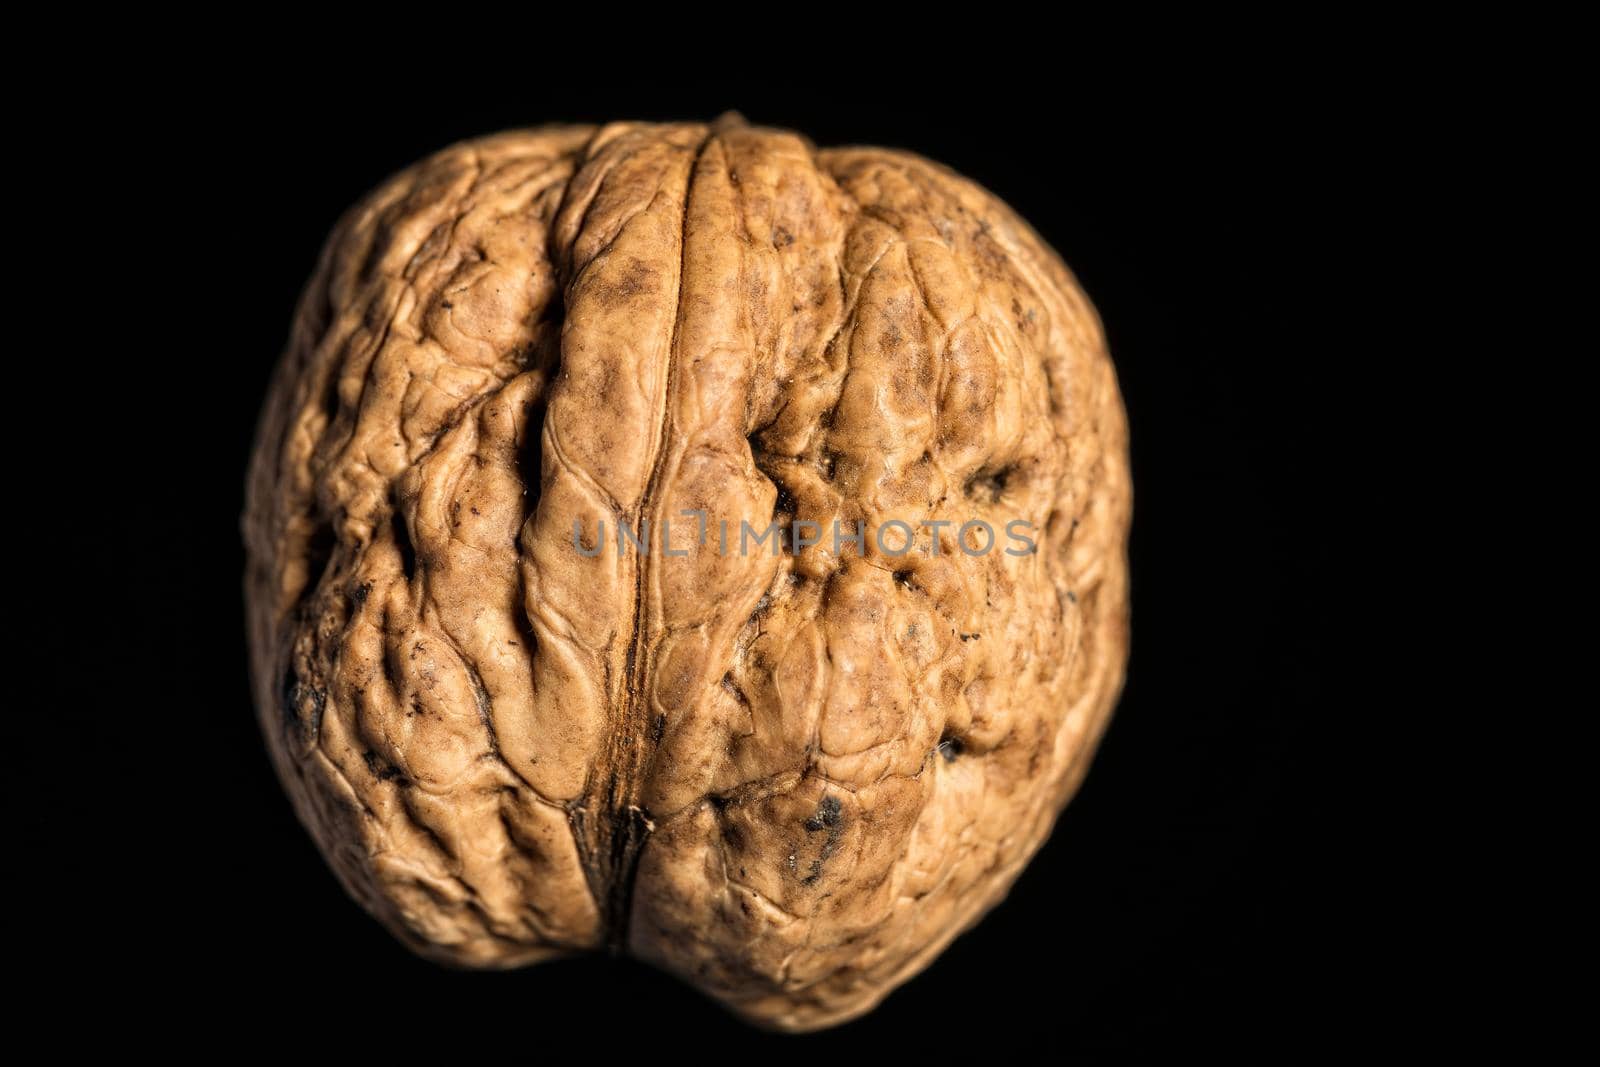 A fresh walnut in the shell on a deep black surface.